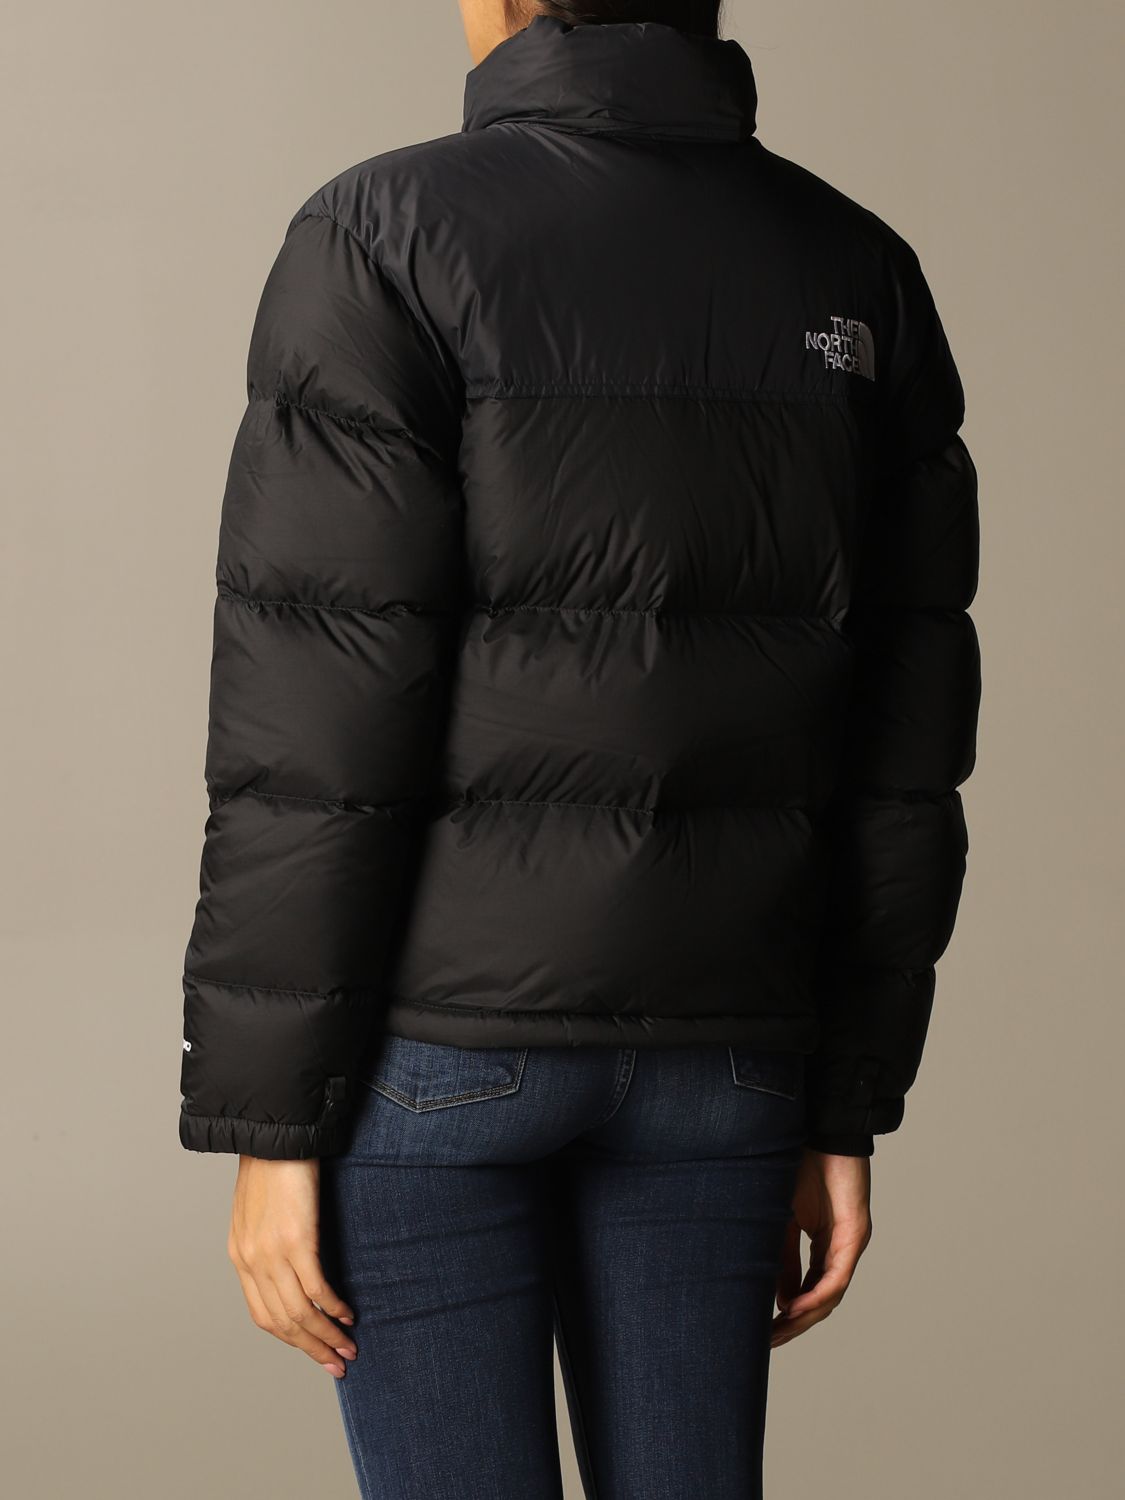 THE NORTH FACE: Jacket women | Jacket The North Face Women Black ...